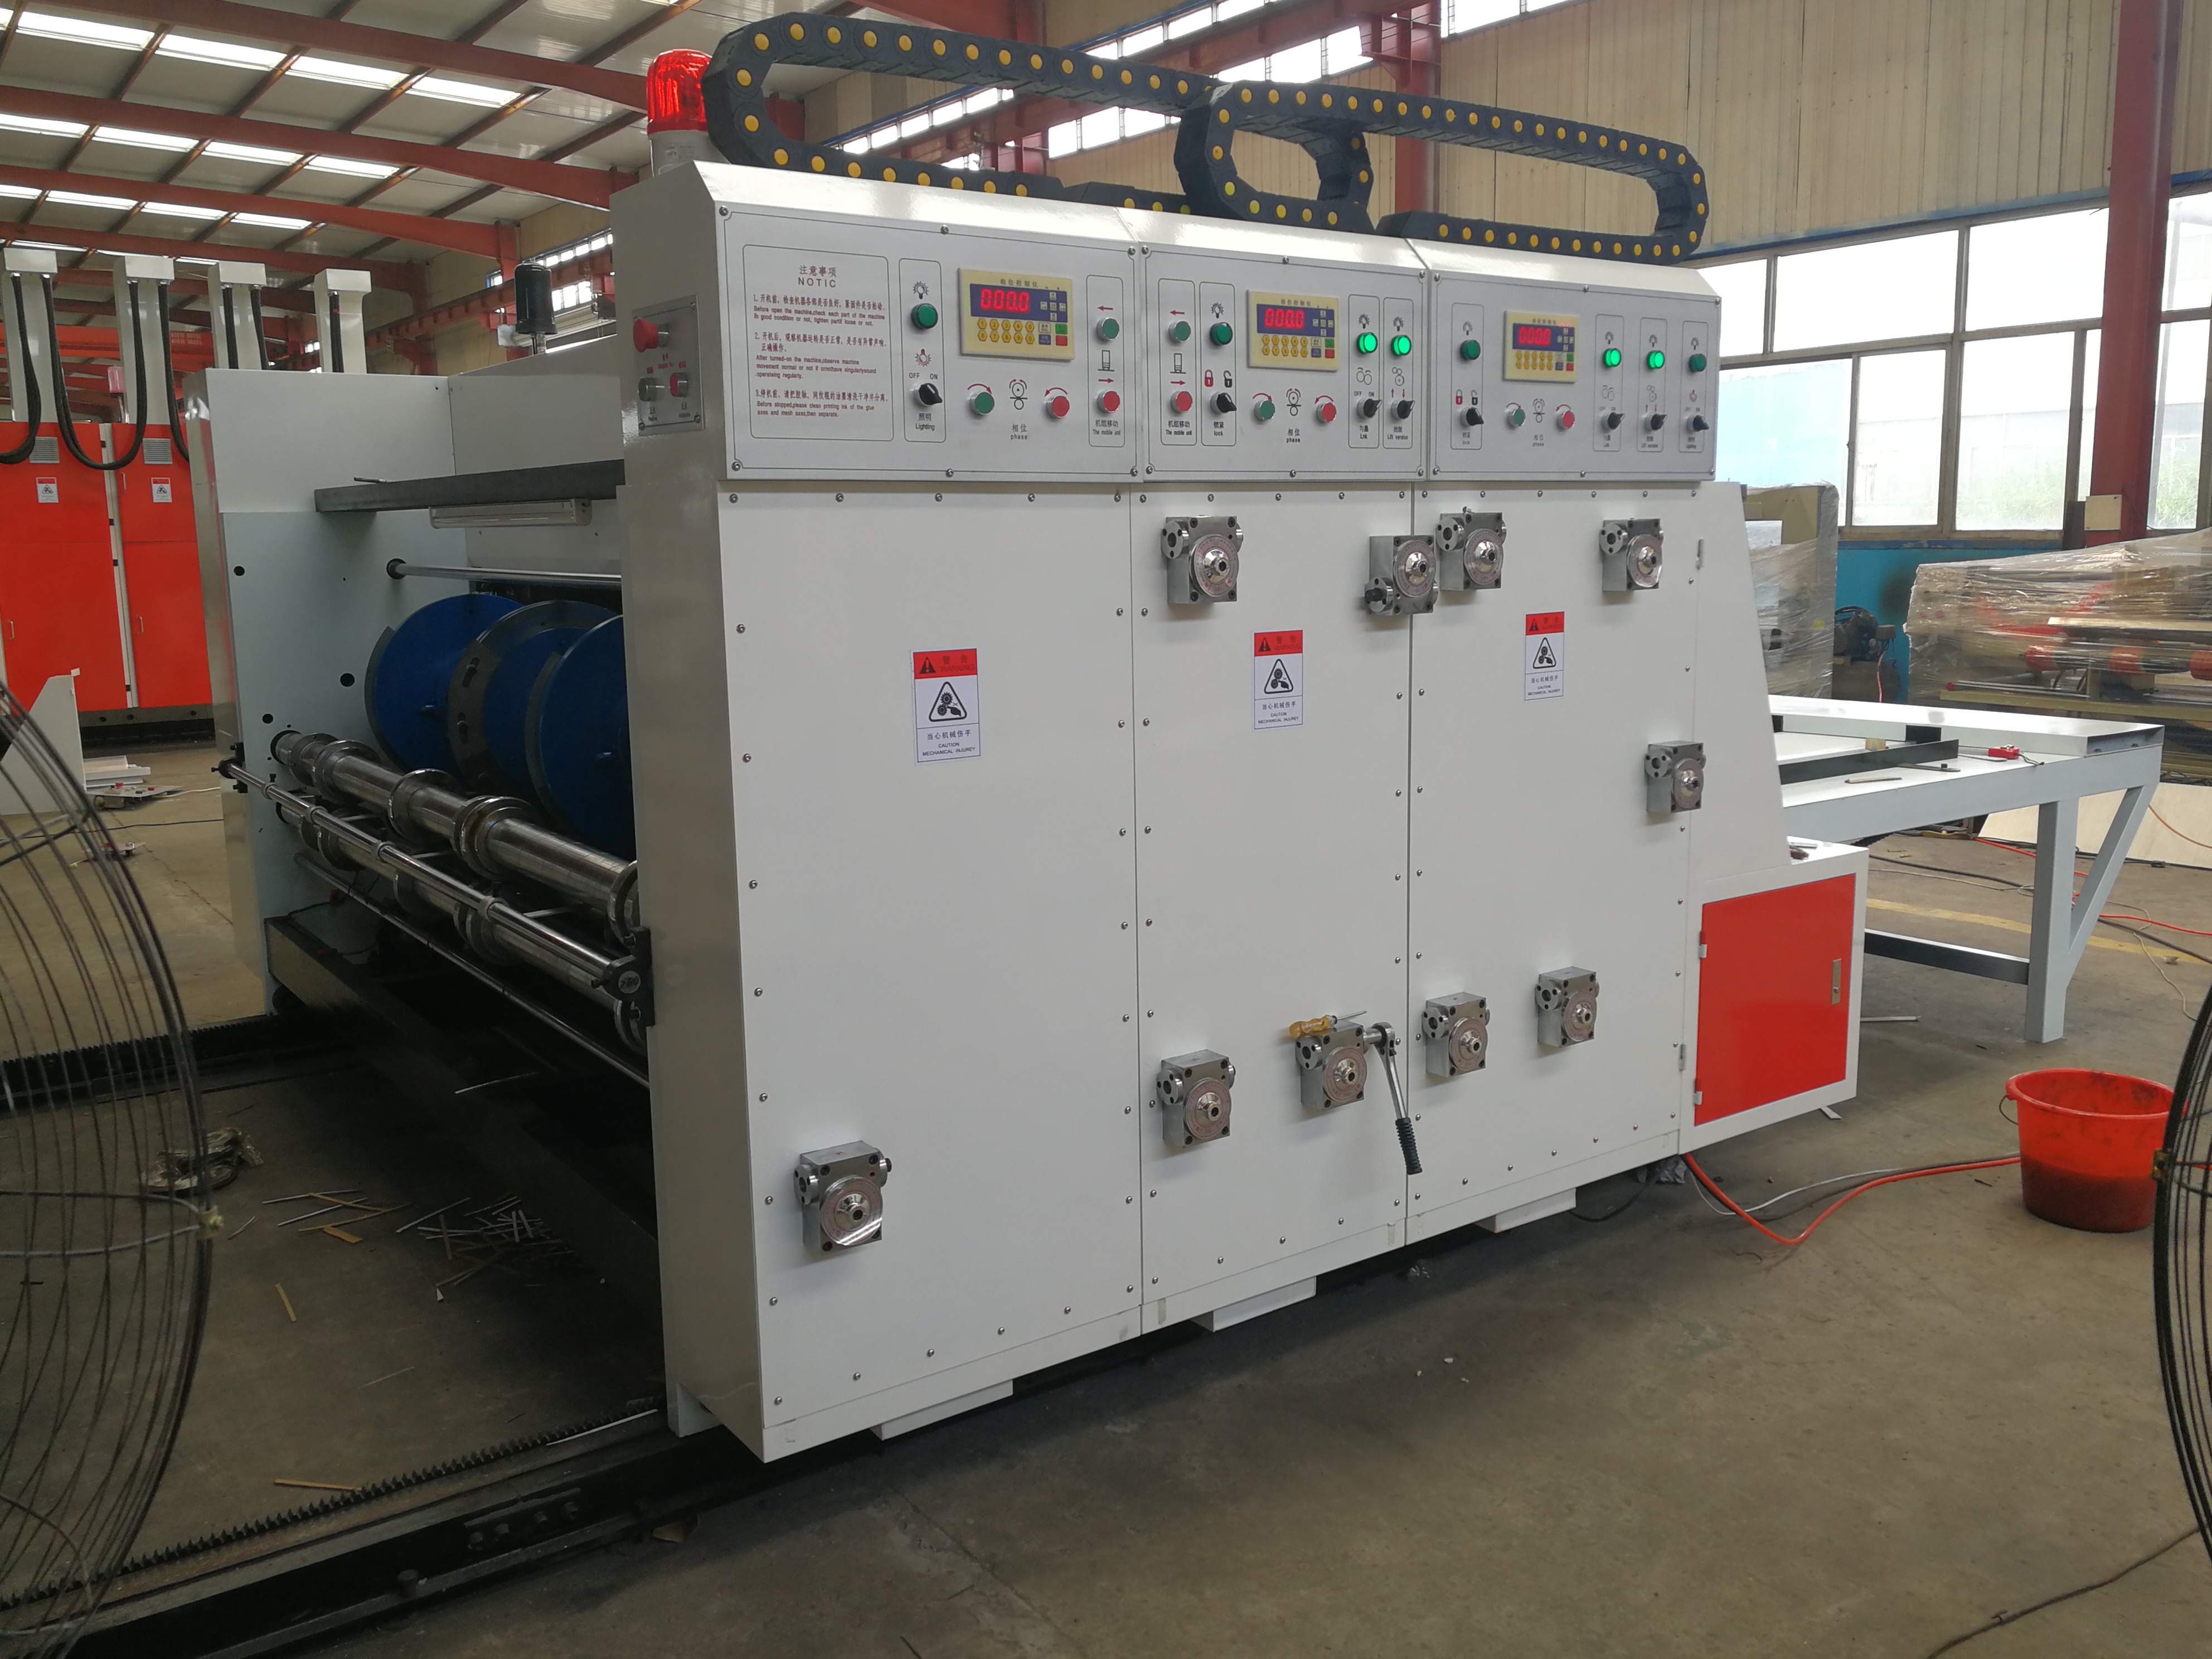 High Speed Semi-auto Double color flexo printer and slotter machine in China